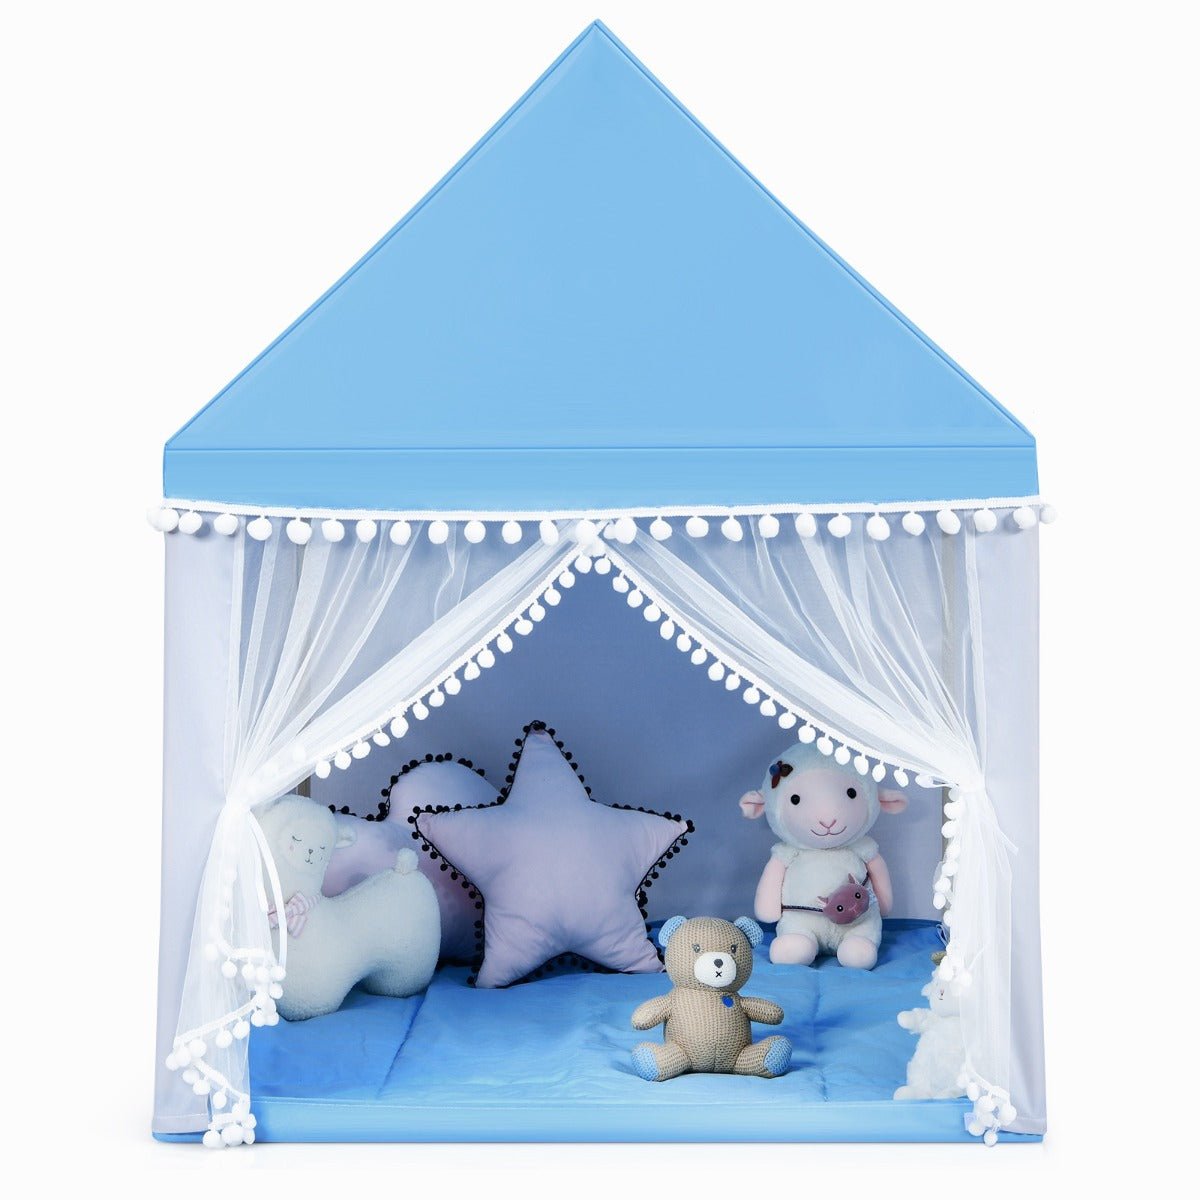 Create Memories: Kids Playhouse Castle with Wood Frame & Cotton Mat in Blue